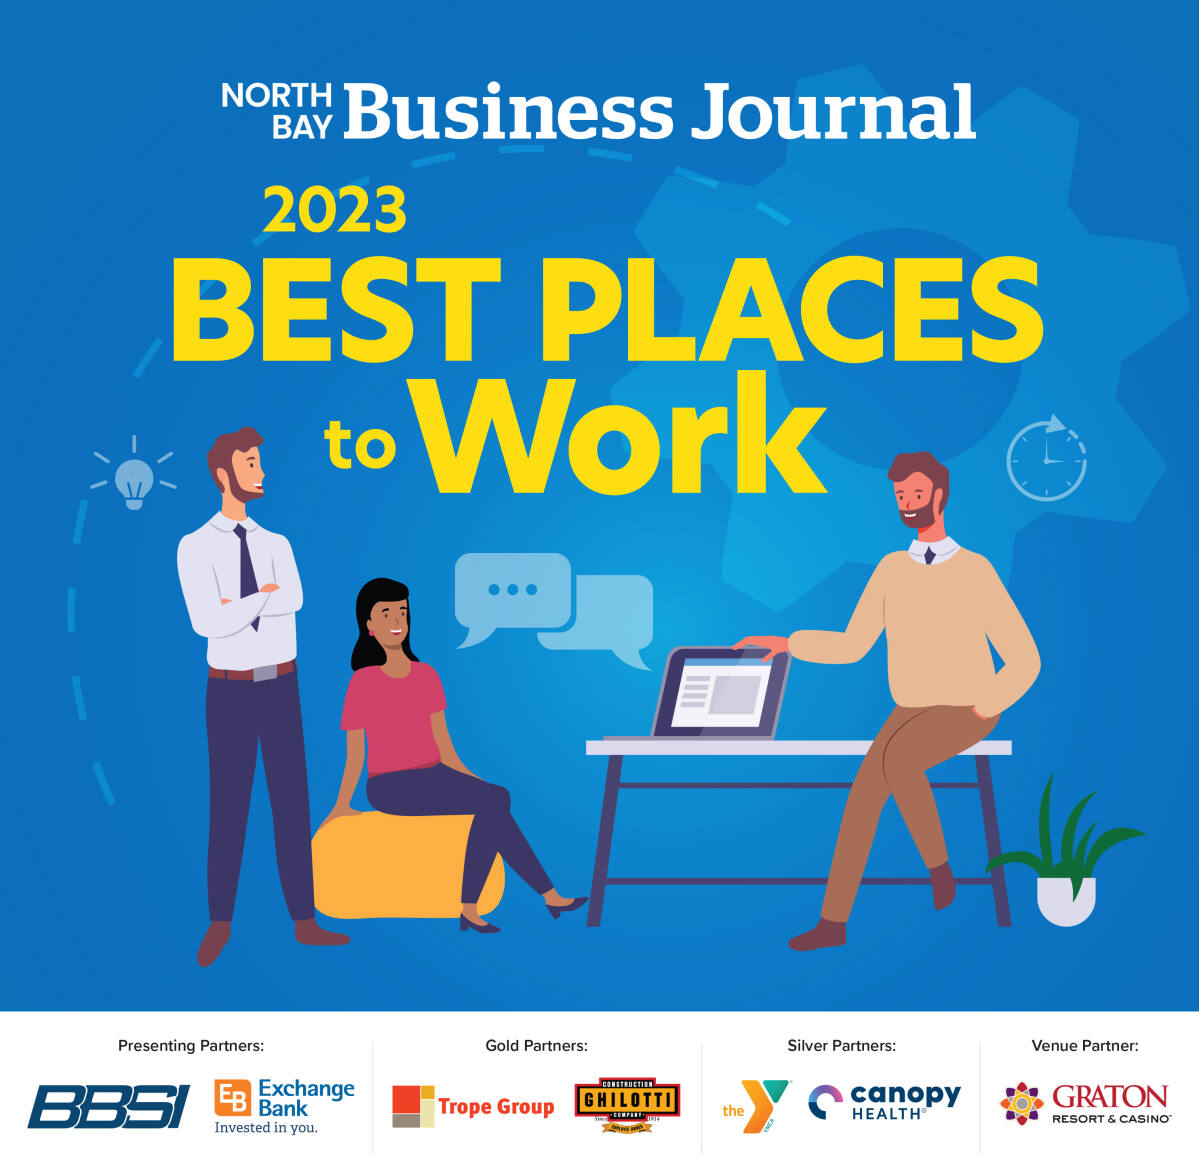 Discover why these 105 North Bay companies are Best Places to Work in 2023